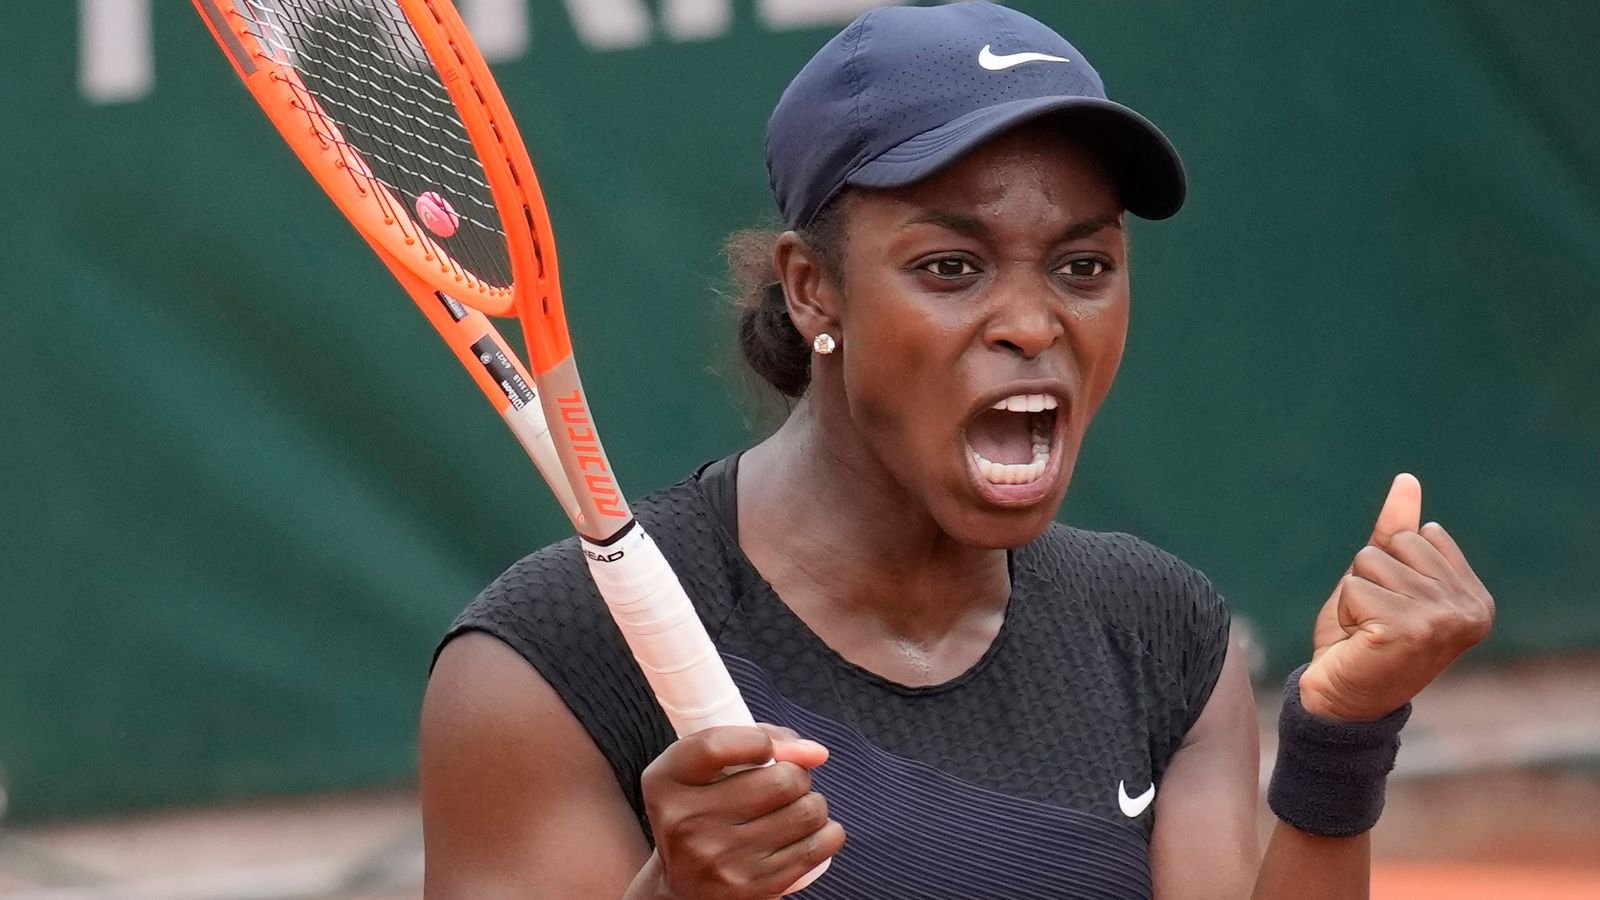 Sloane Stephens feels mental health has been neglected far too long on the tennis circuit